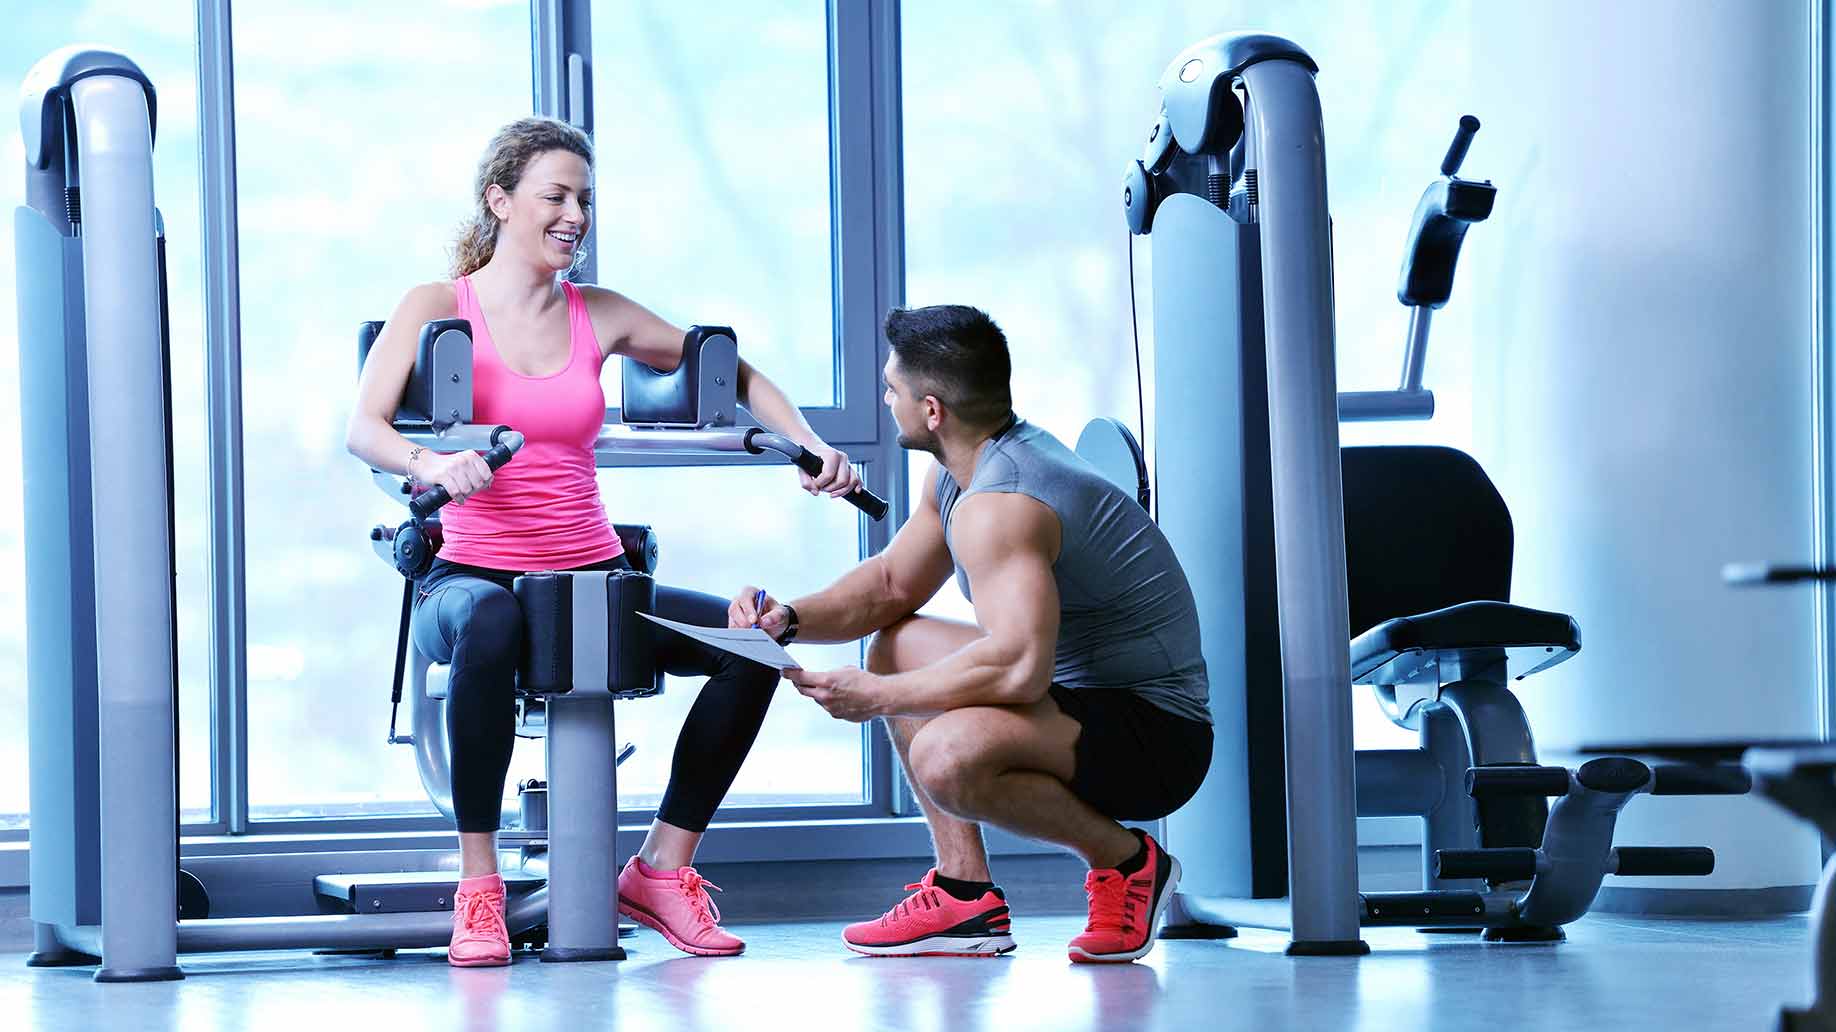 Why Should You Join Online Fitness Training Programs?